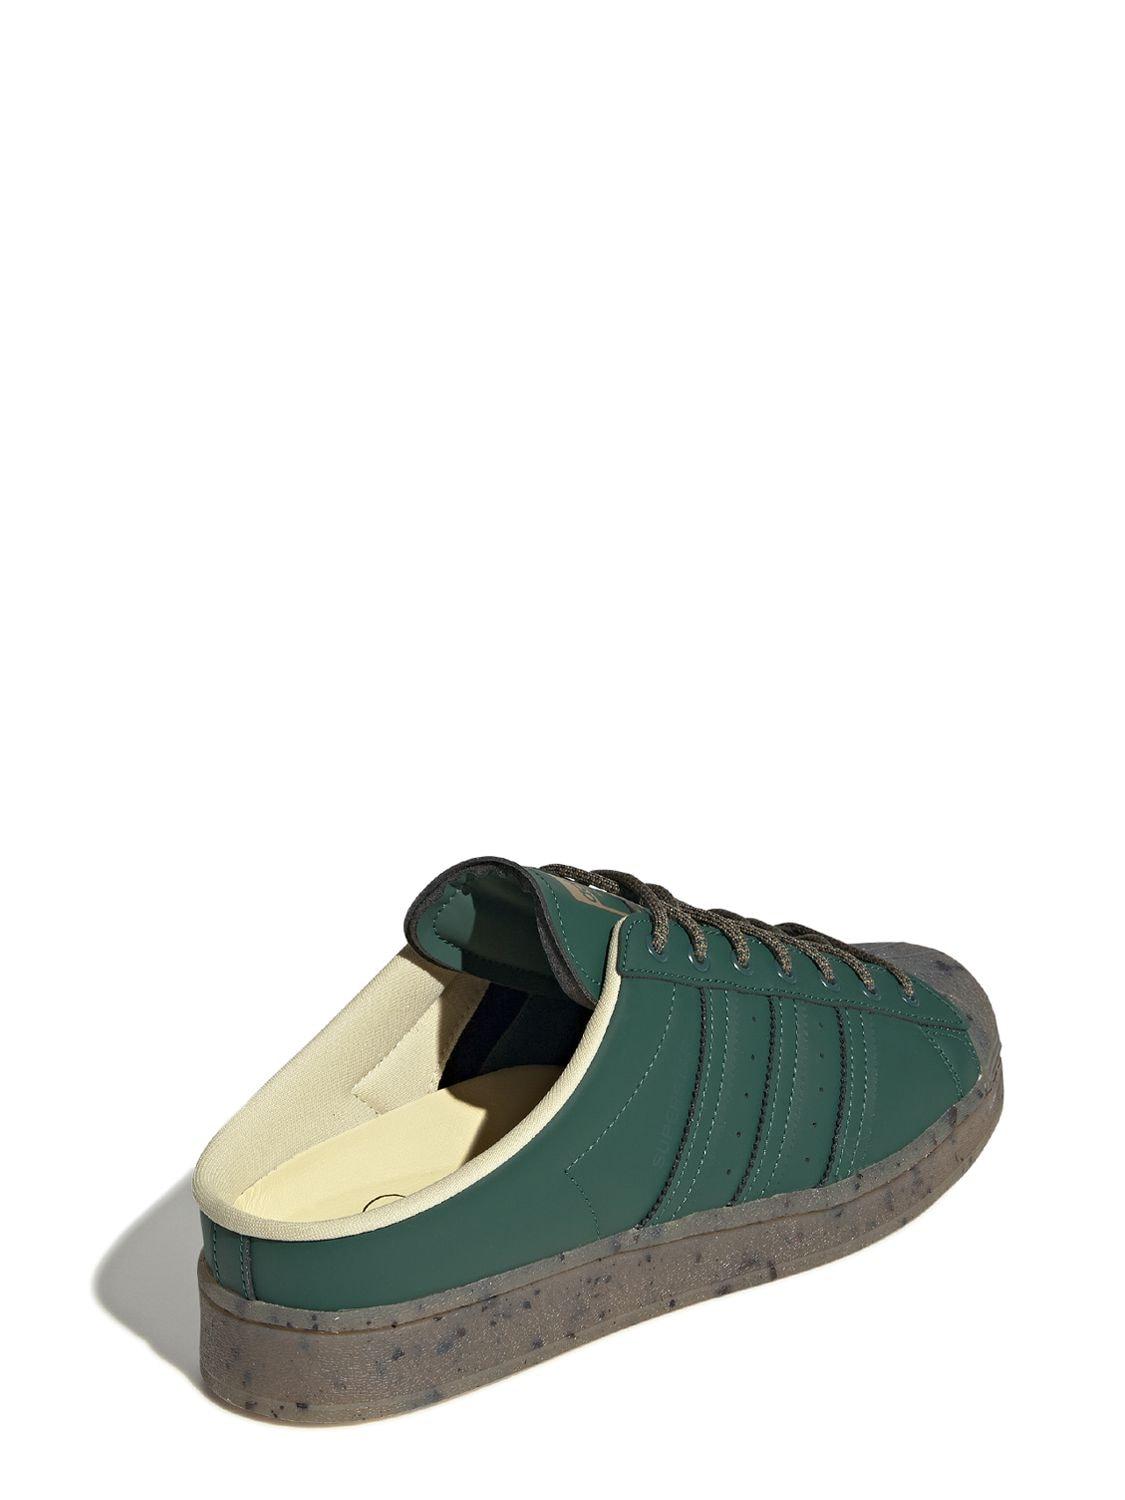 adidas Originals Superstar Mule Plant And Grow Sneakers in Green | Lyst